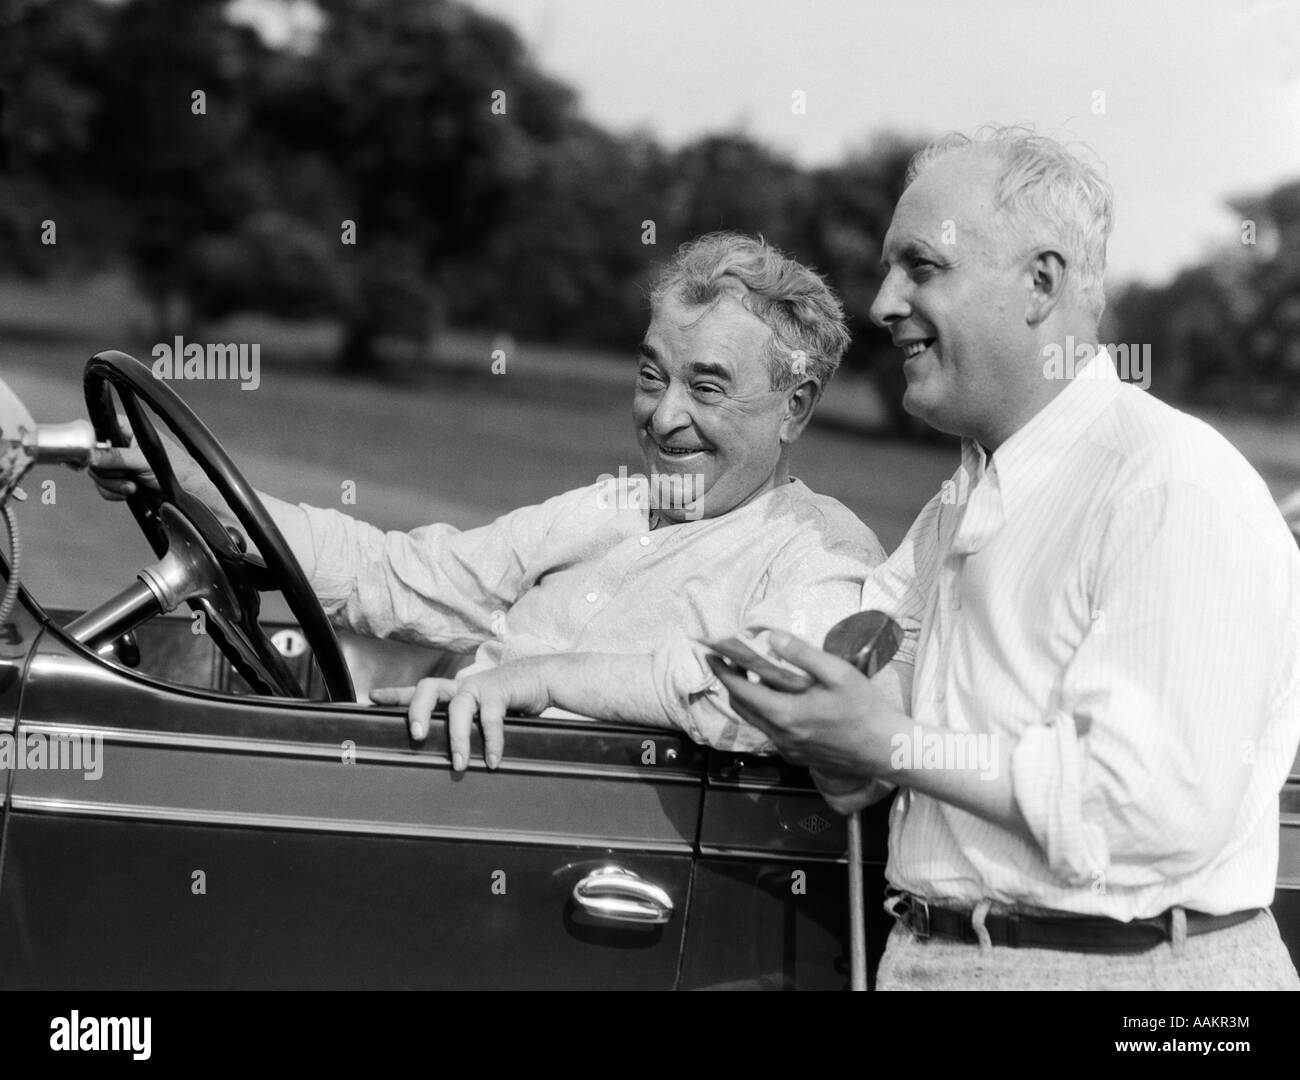 1920s 1930s SENIOR MAN SITTING DRIVING CAR AND ANOTHER STANDING HOLDING GOLF CLUB SHARING A LAUGH Stock Photo